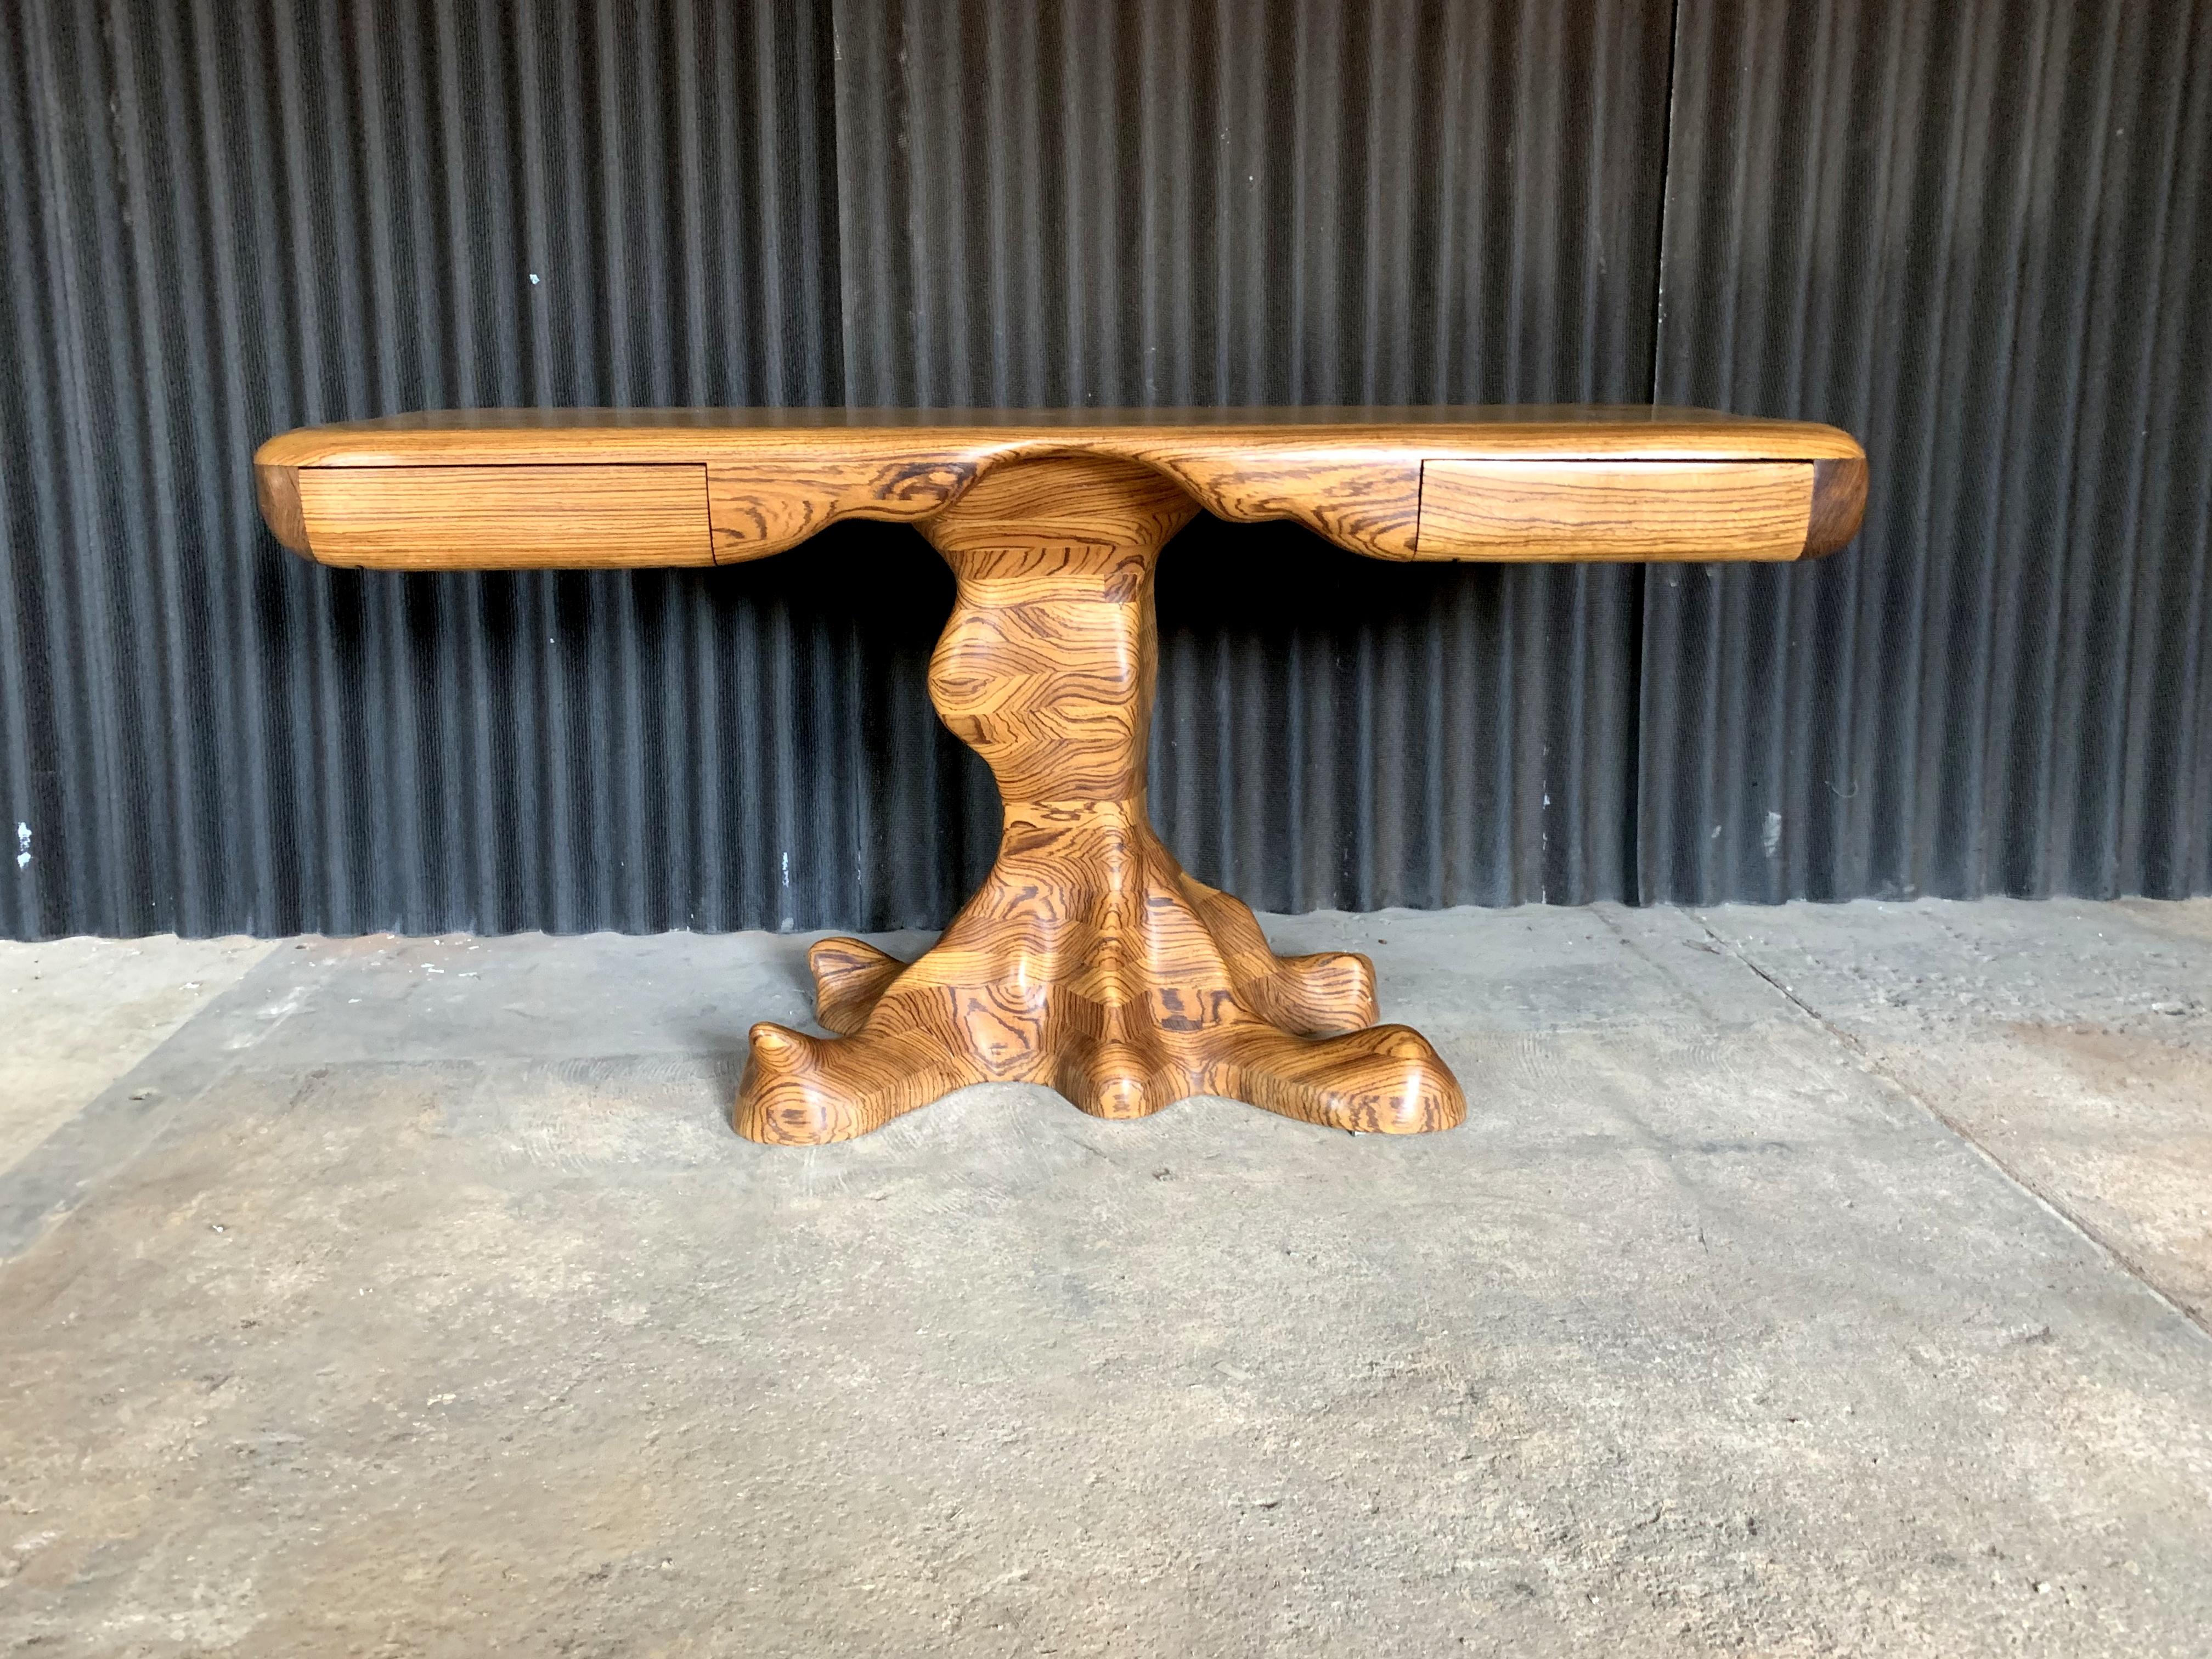 What a Stunning piece! The Color, Pattern, Shape, Design, Everything!
This Console is so versatile! Use it as a desk, behind a sofa, an entryway. The possibilities are endless!
The wood is in incredible condition with no broken pieces. We've only